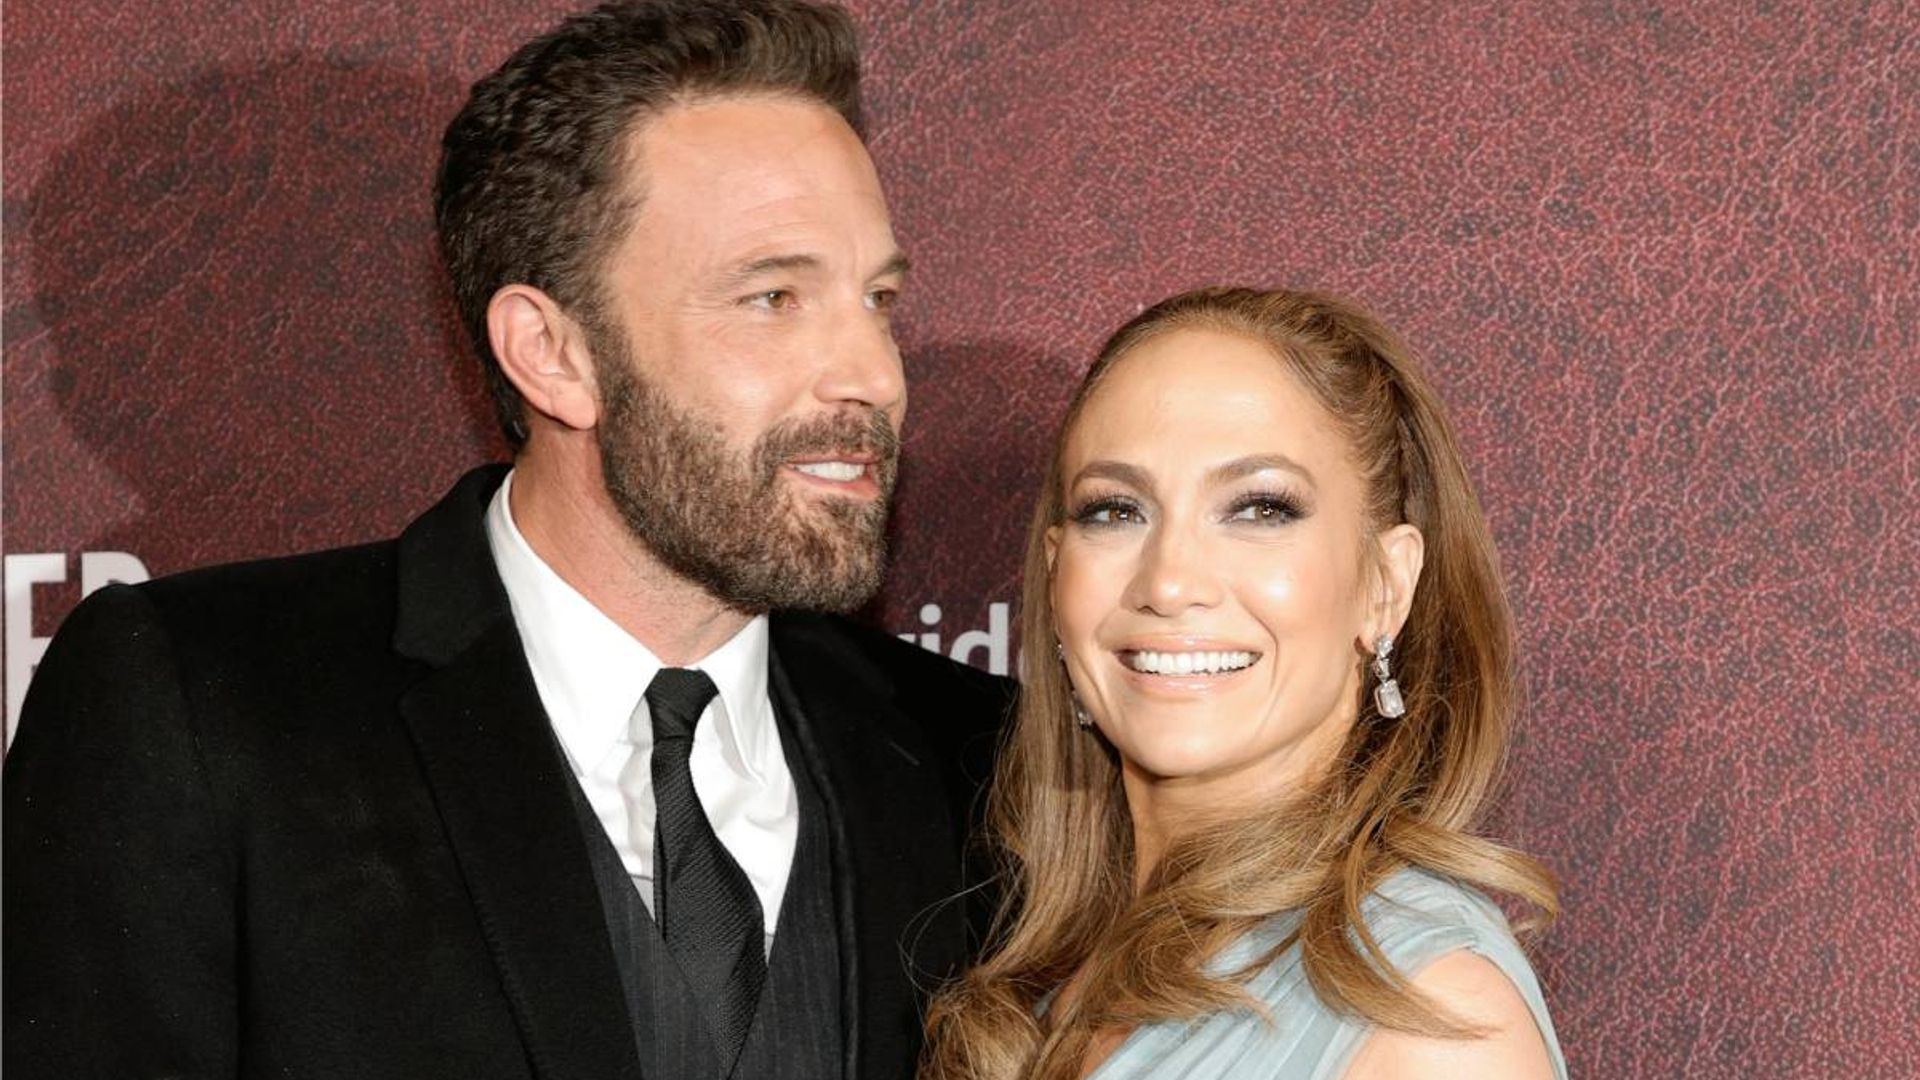 Jennifer Lopez steps out in extra meaningful dress for date night with Ben Affleck